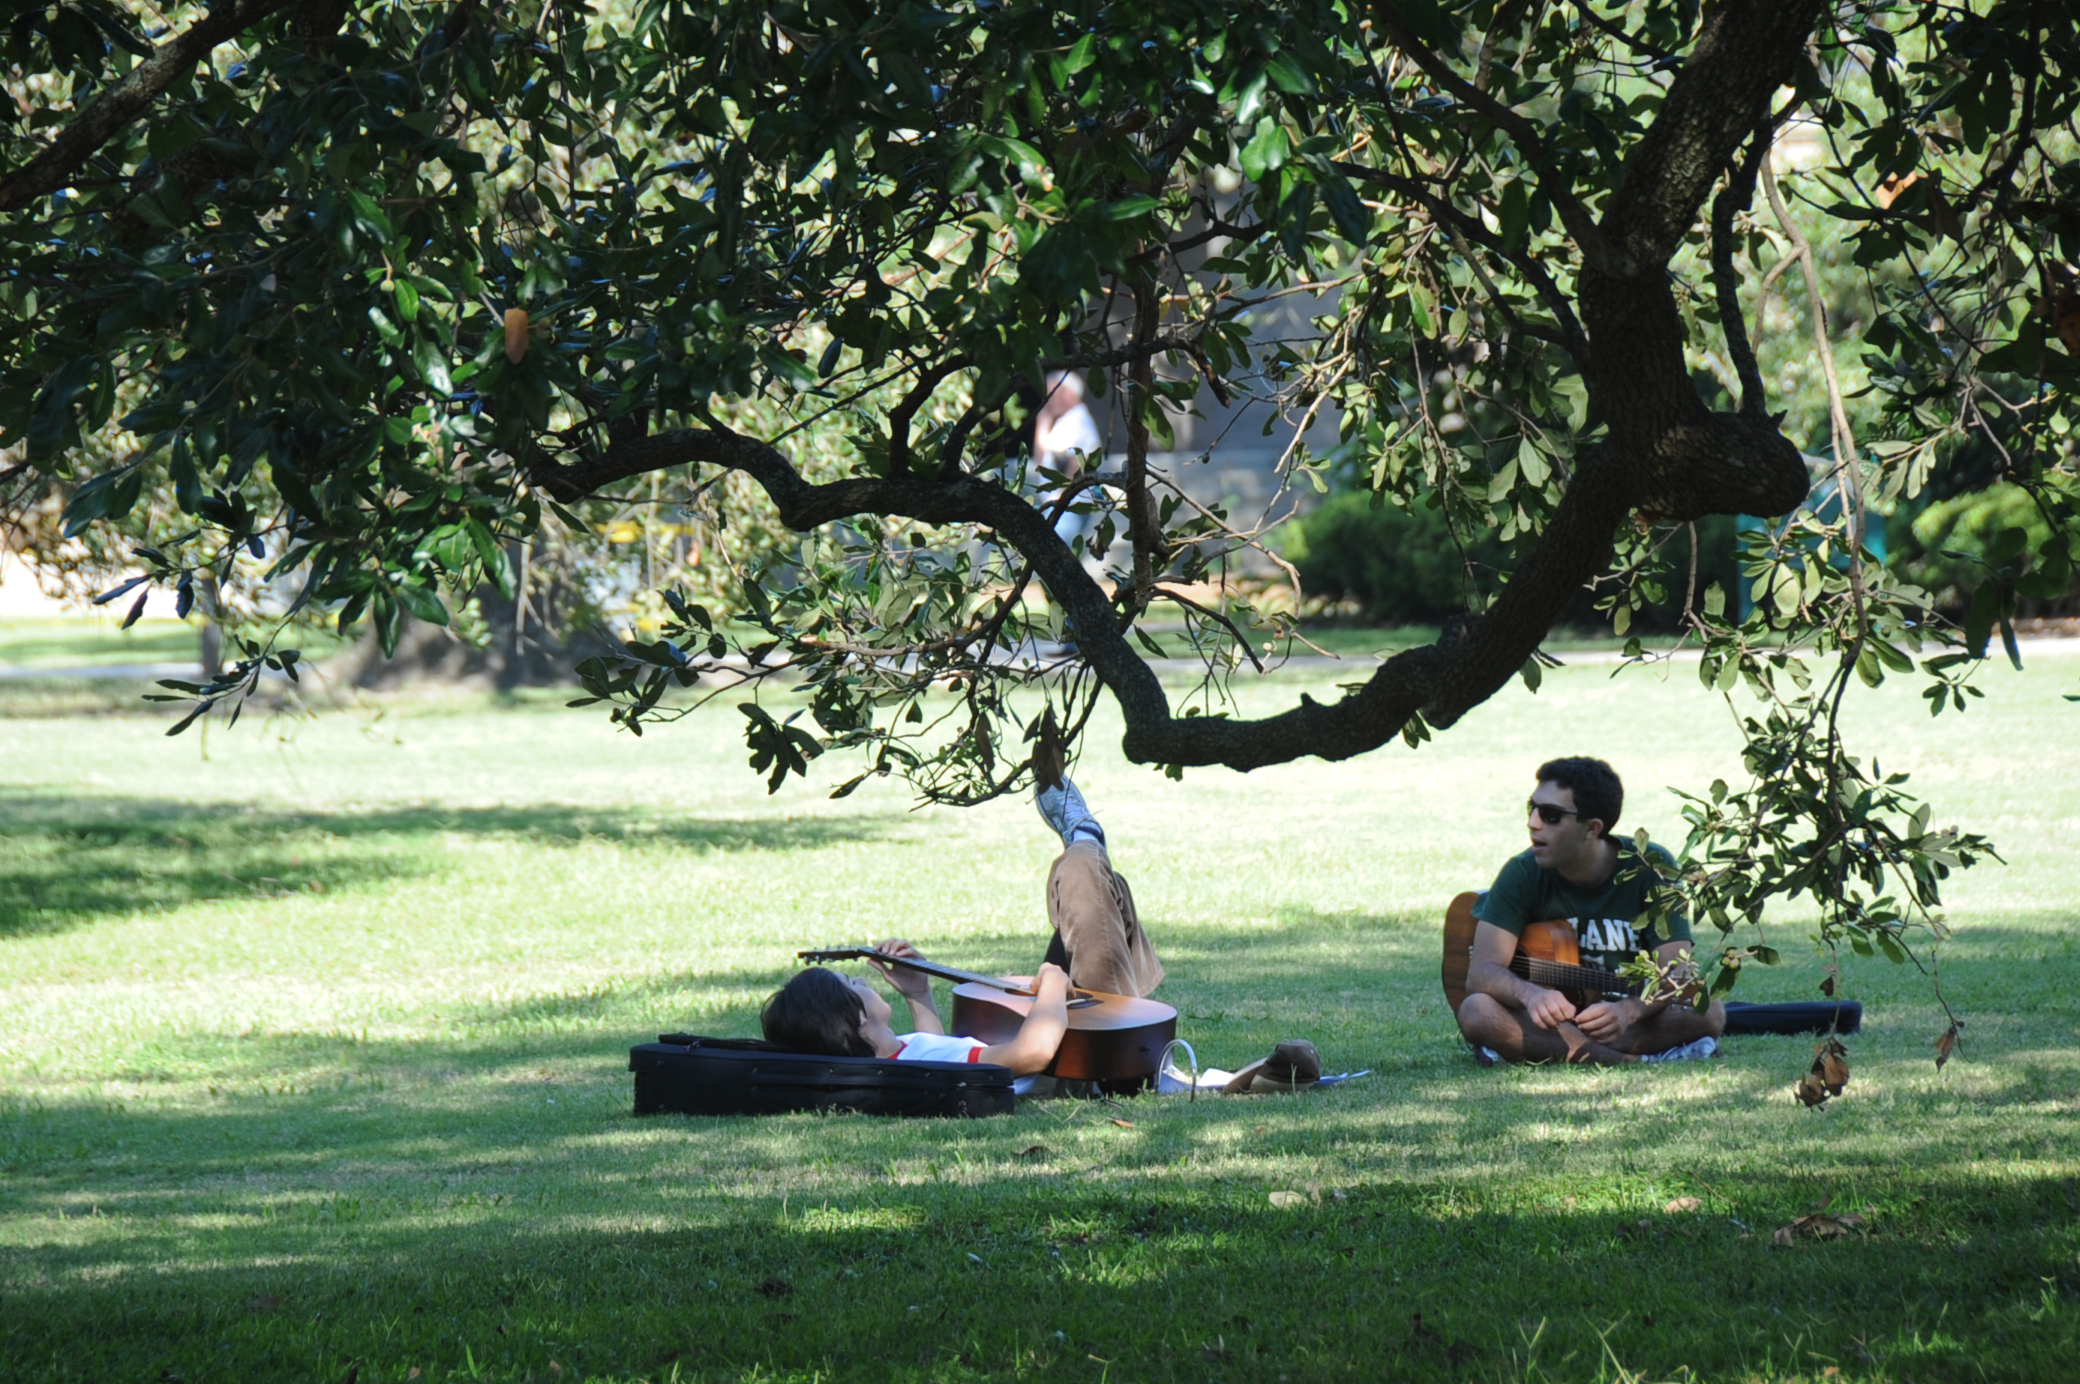 File:Relaxing under a Tree (2901573355).jpg - Wikimedia Commons